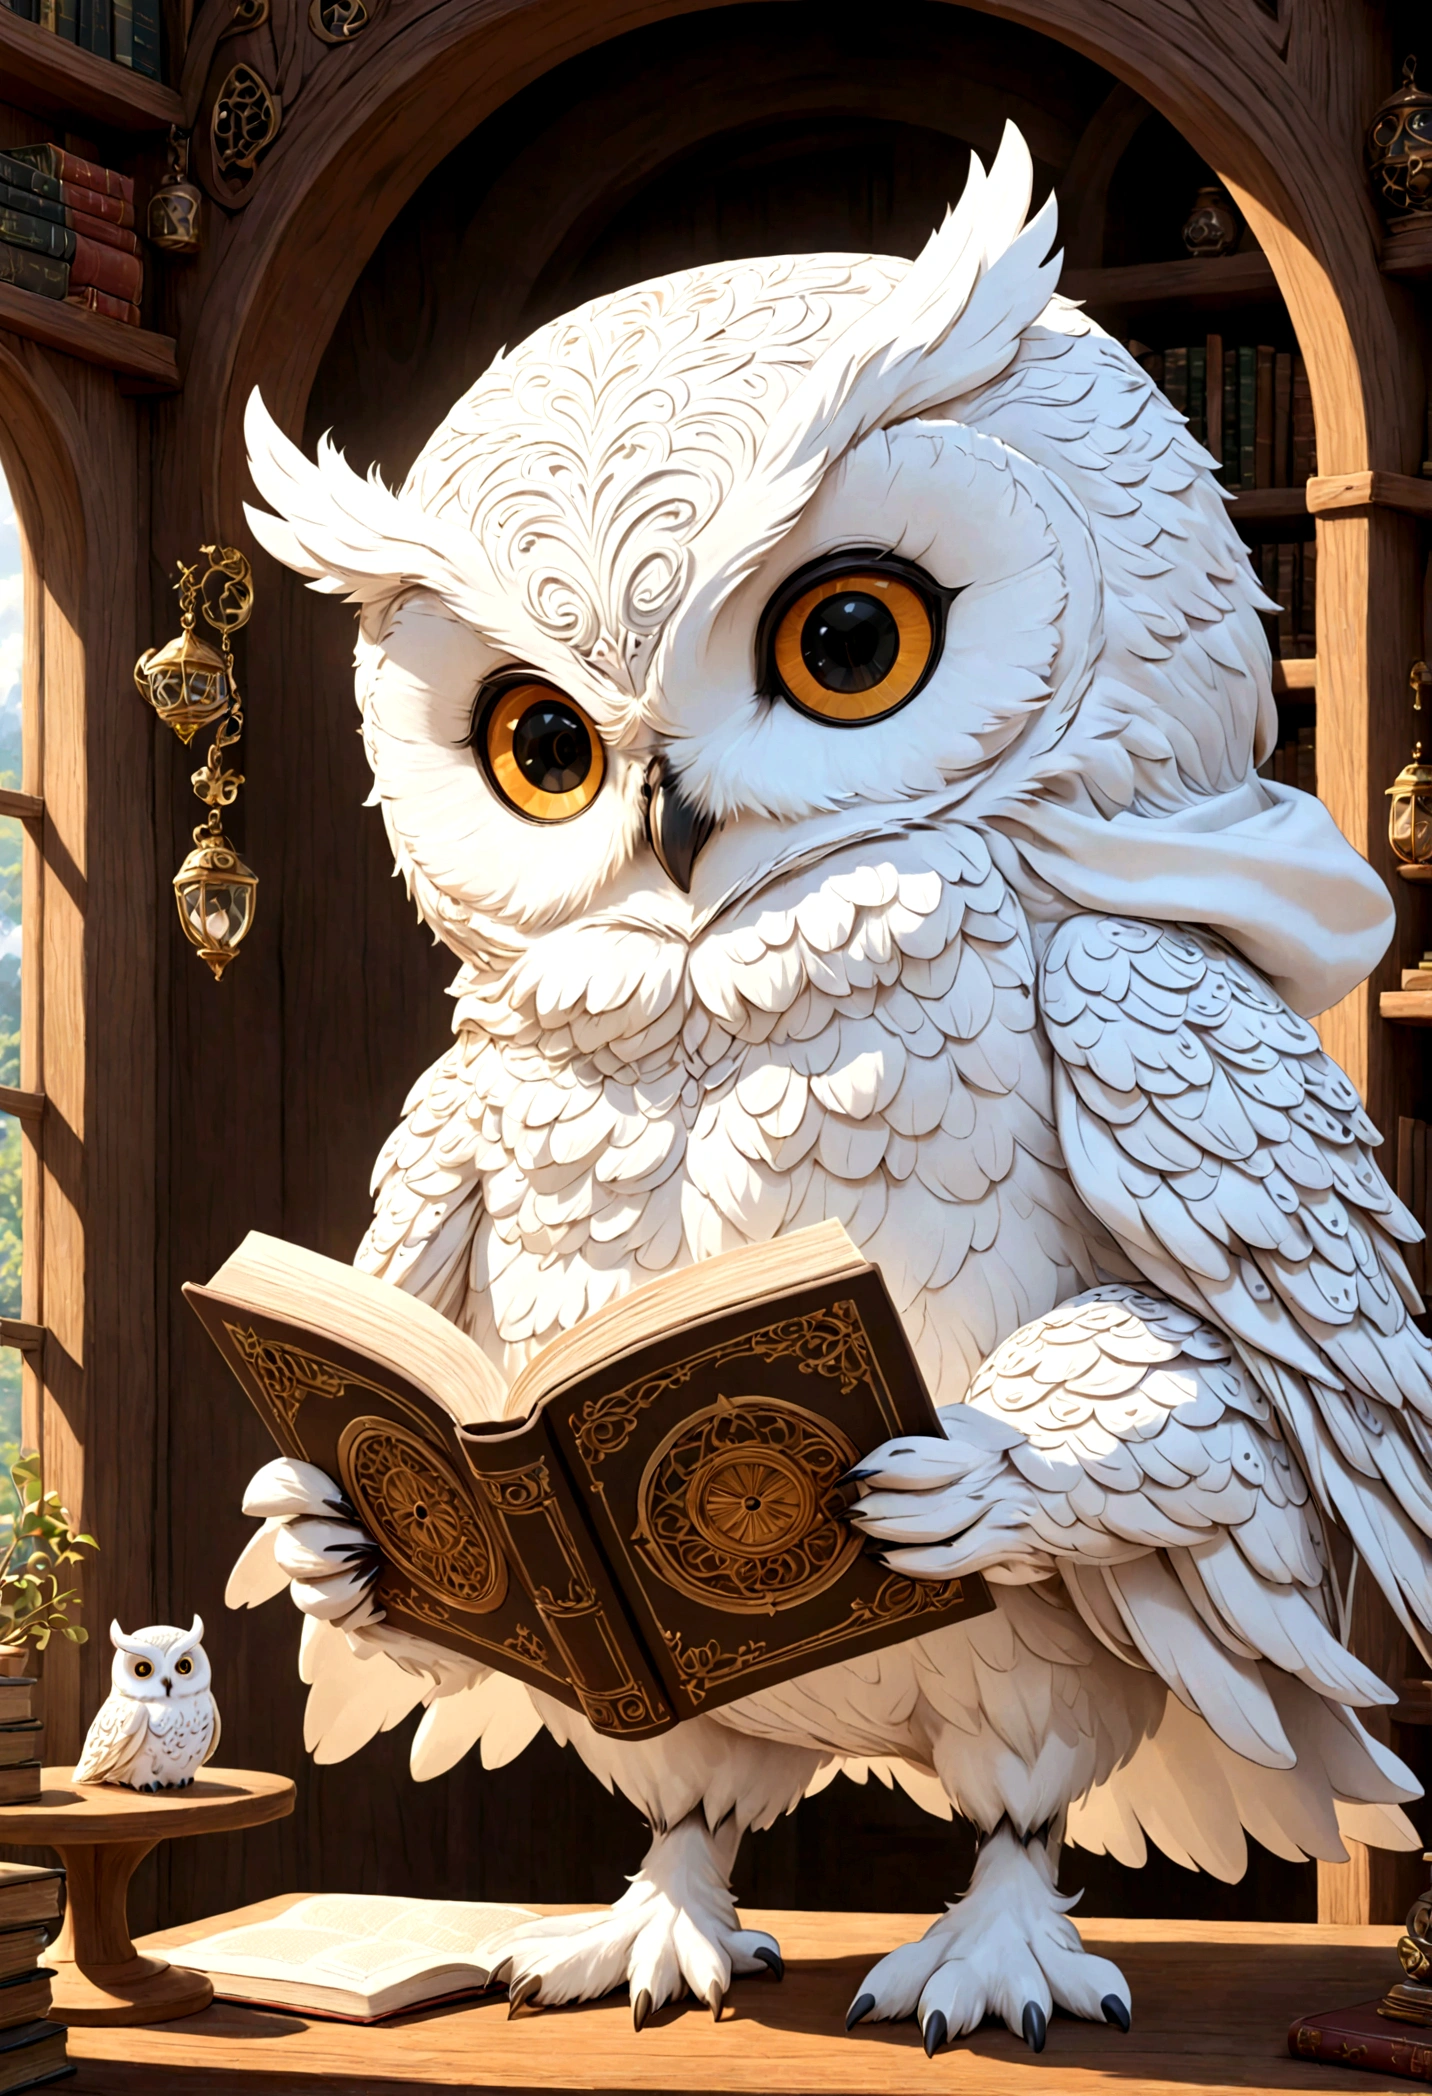  A vibrant fantasy-like illustration of a cute white owl in a white hood reading a book at the table, created in a hyper-detailed animation style( Perfect anatomical structure )Background laboratory calm and peaceful very cute white owl is reading a book cartoon 3d style   (masterpiece),Realistic masterpiece (best quality), (Ultra-high detail)

                   Very cute white owl doll stunning artwork super detailed digital art